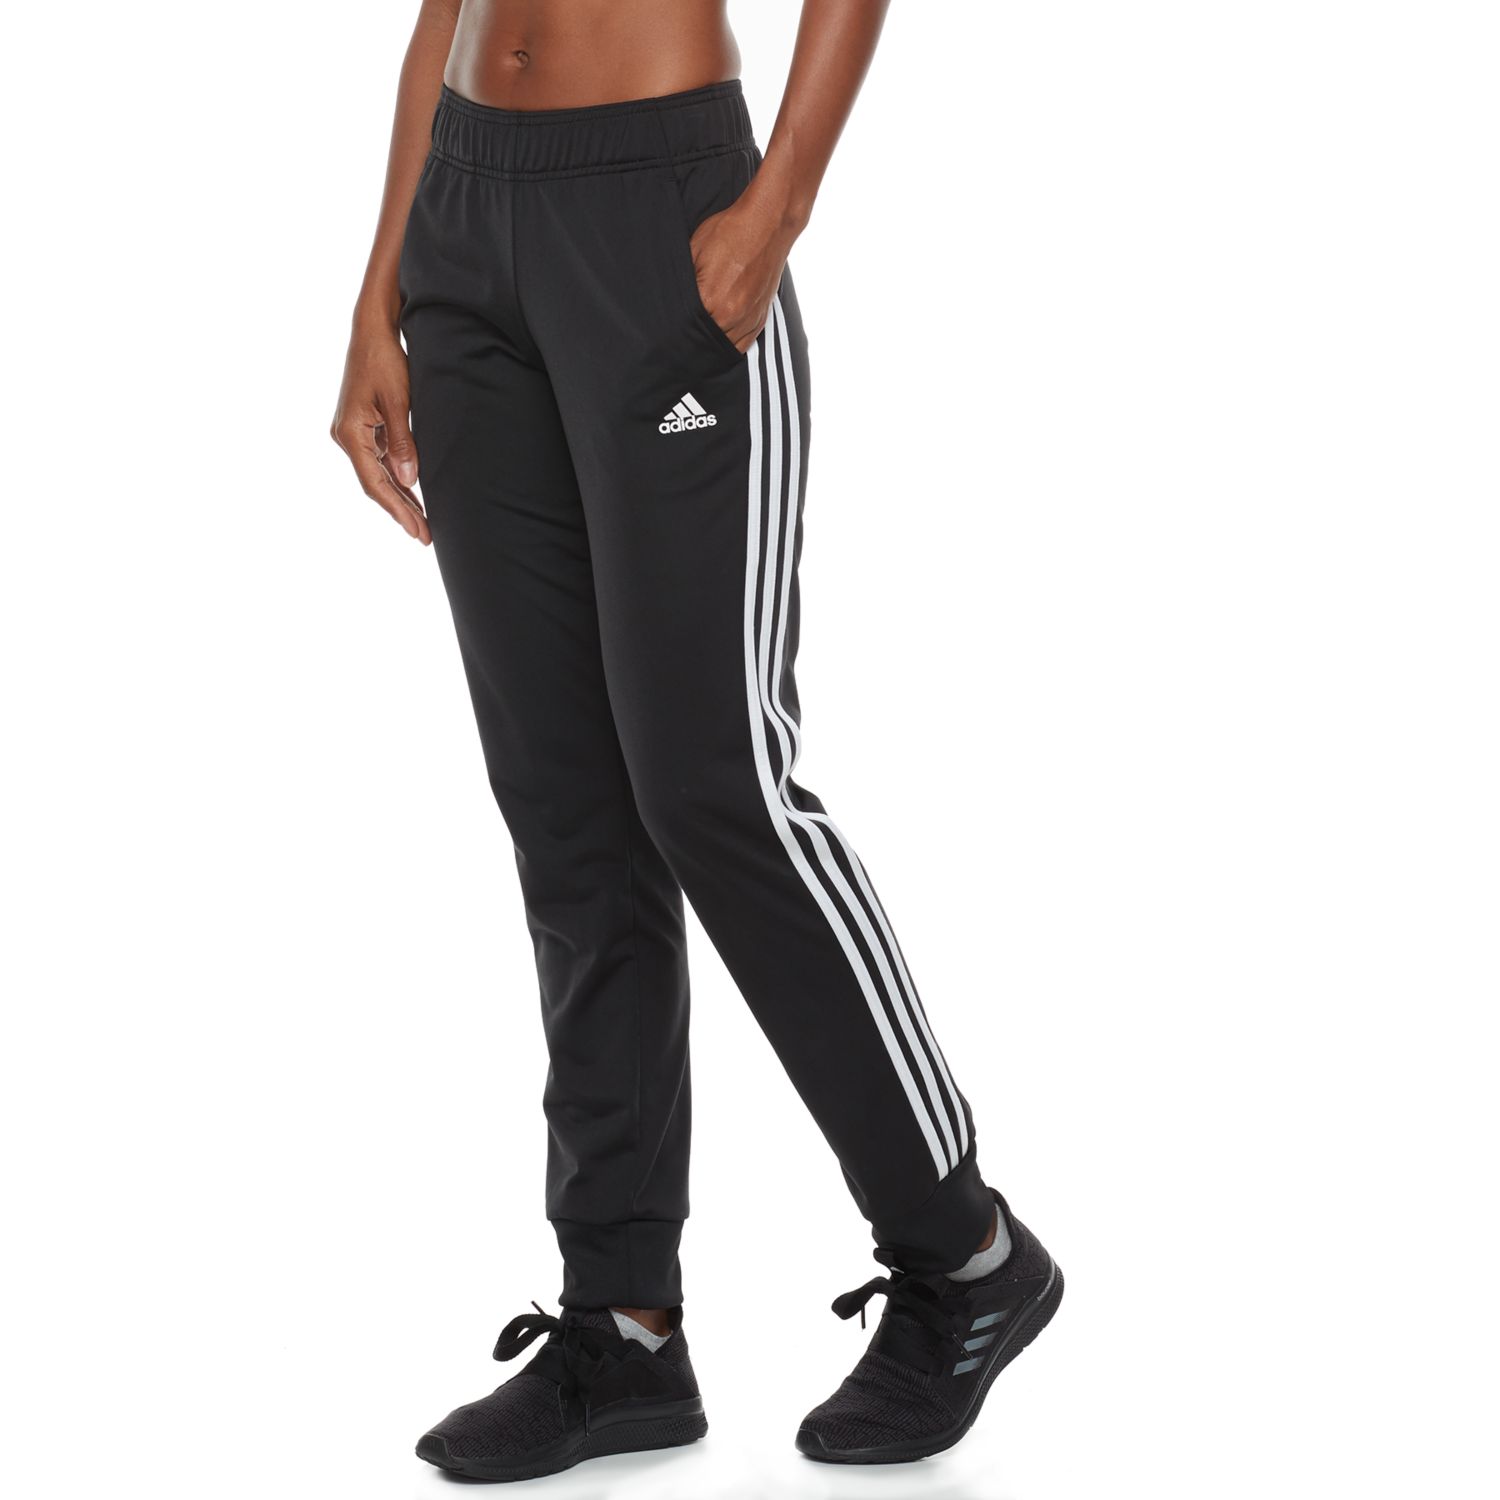 adidas women's designed to move pants